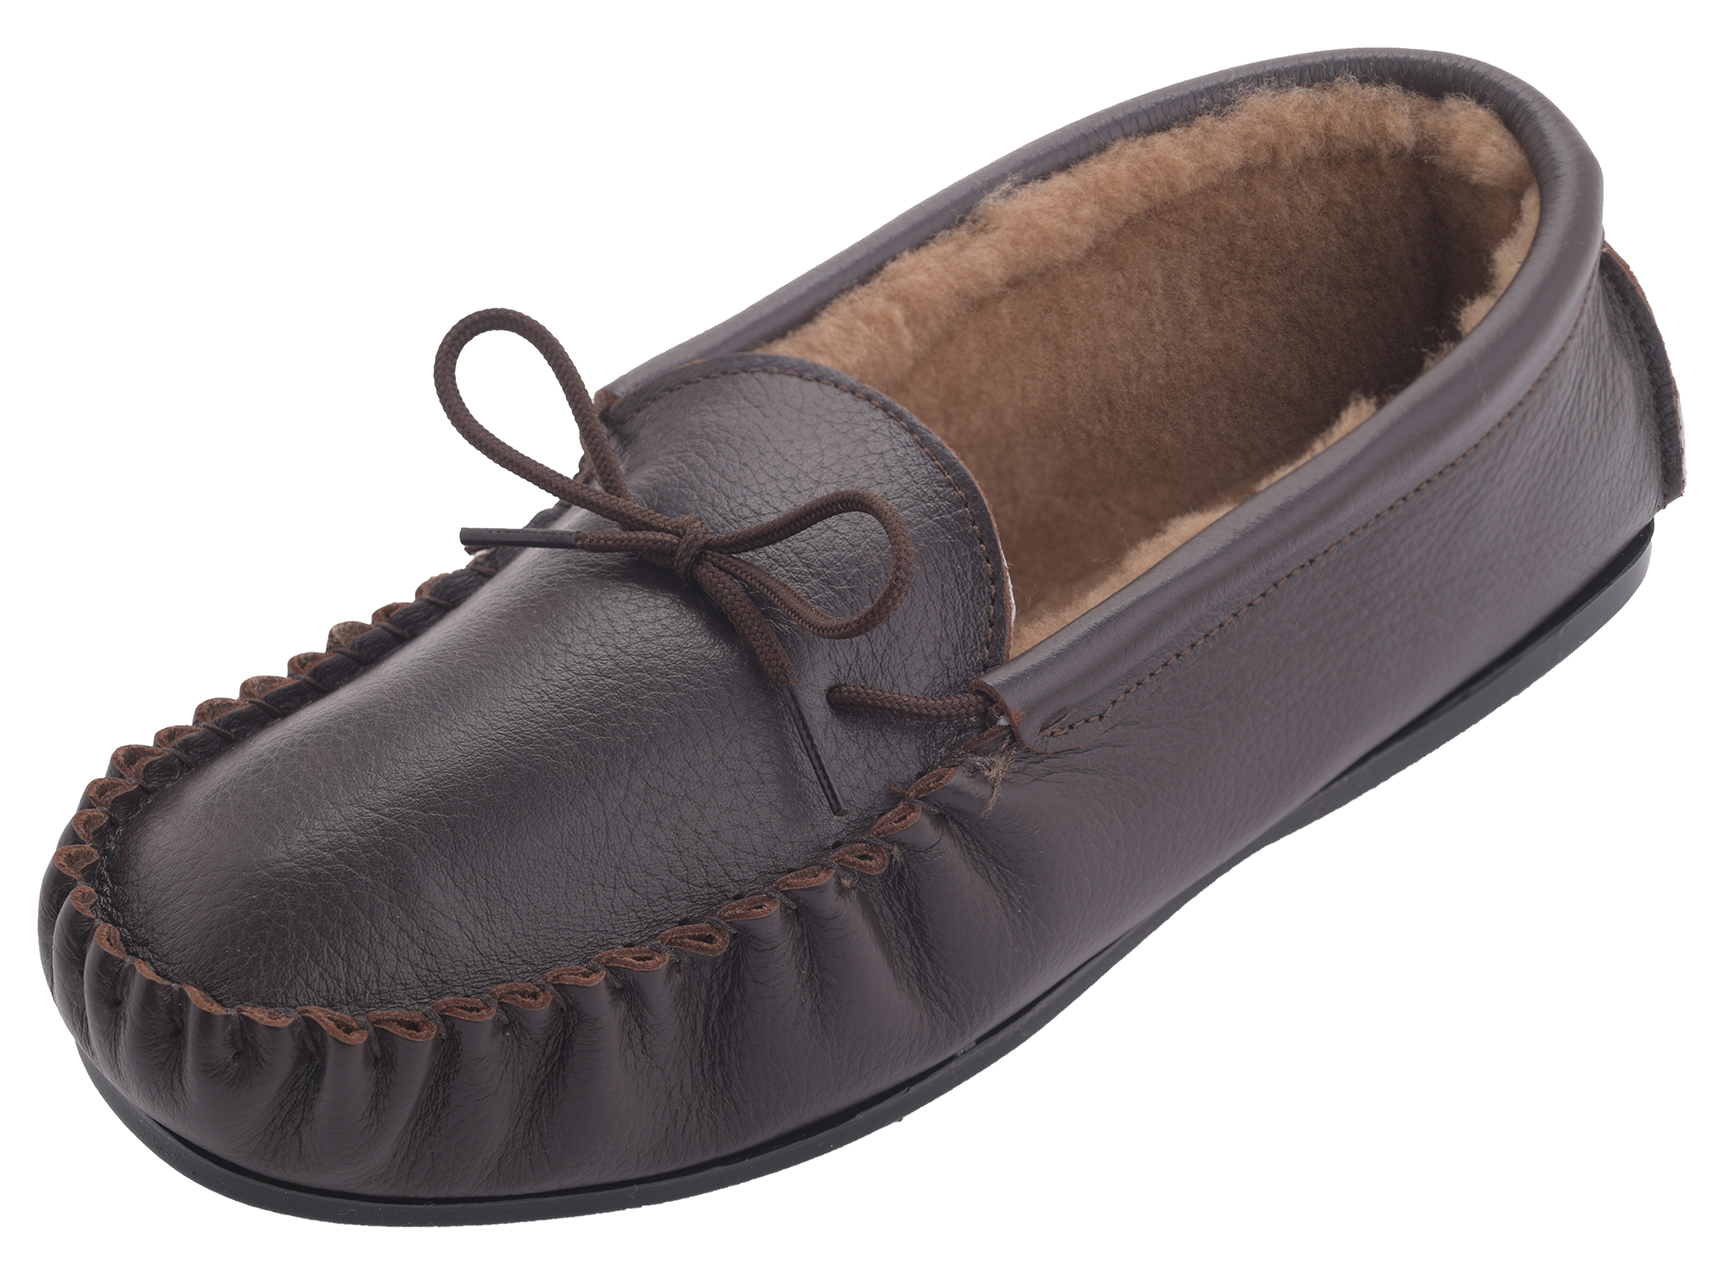 Mens Leather Sheepskin Moccasin Slippers with Rubber Sole UK Made by ...